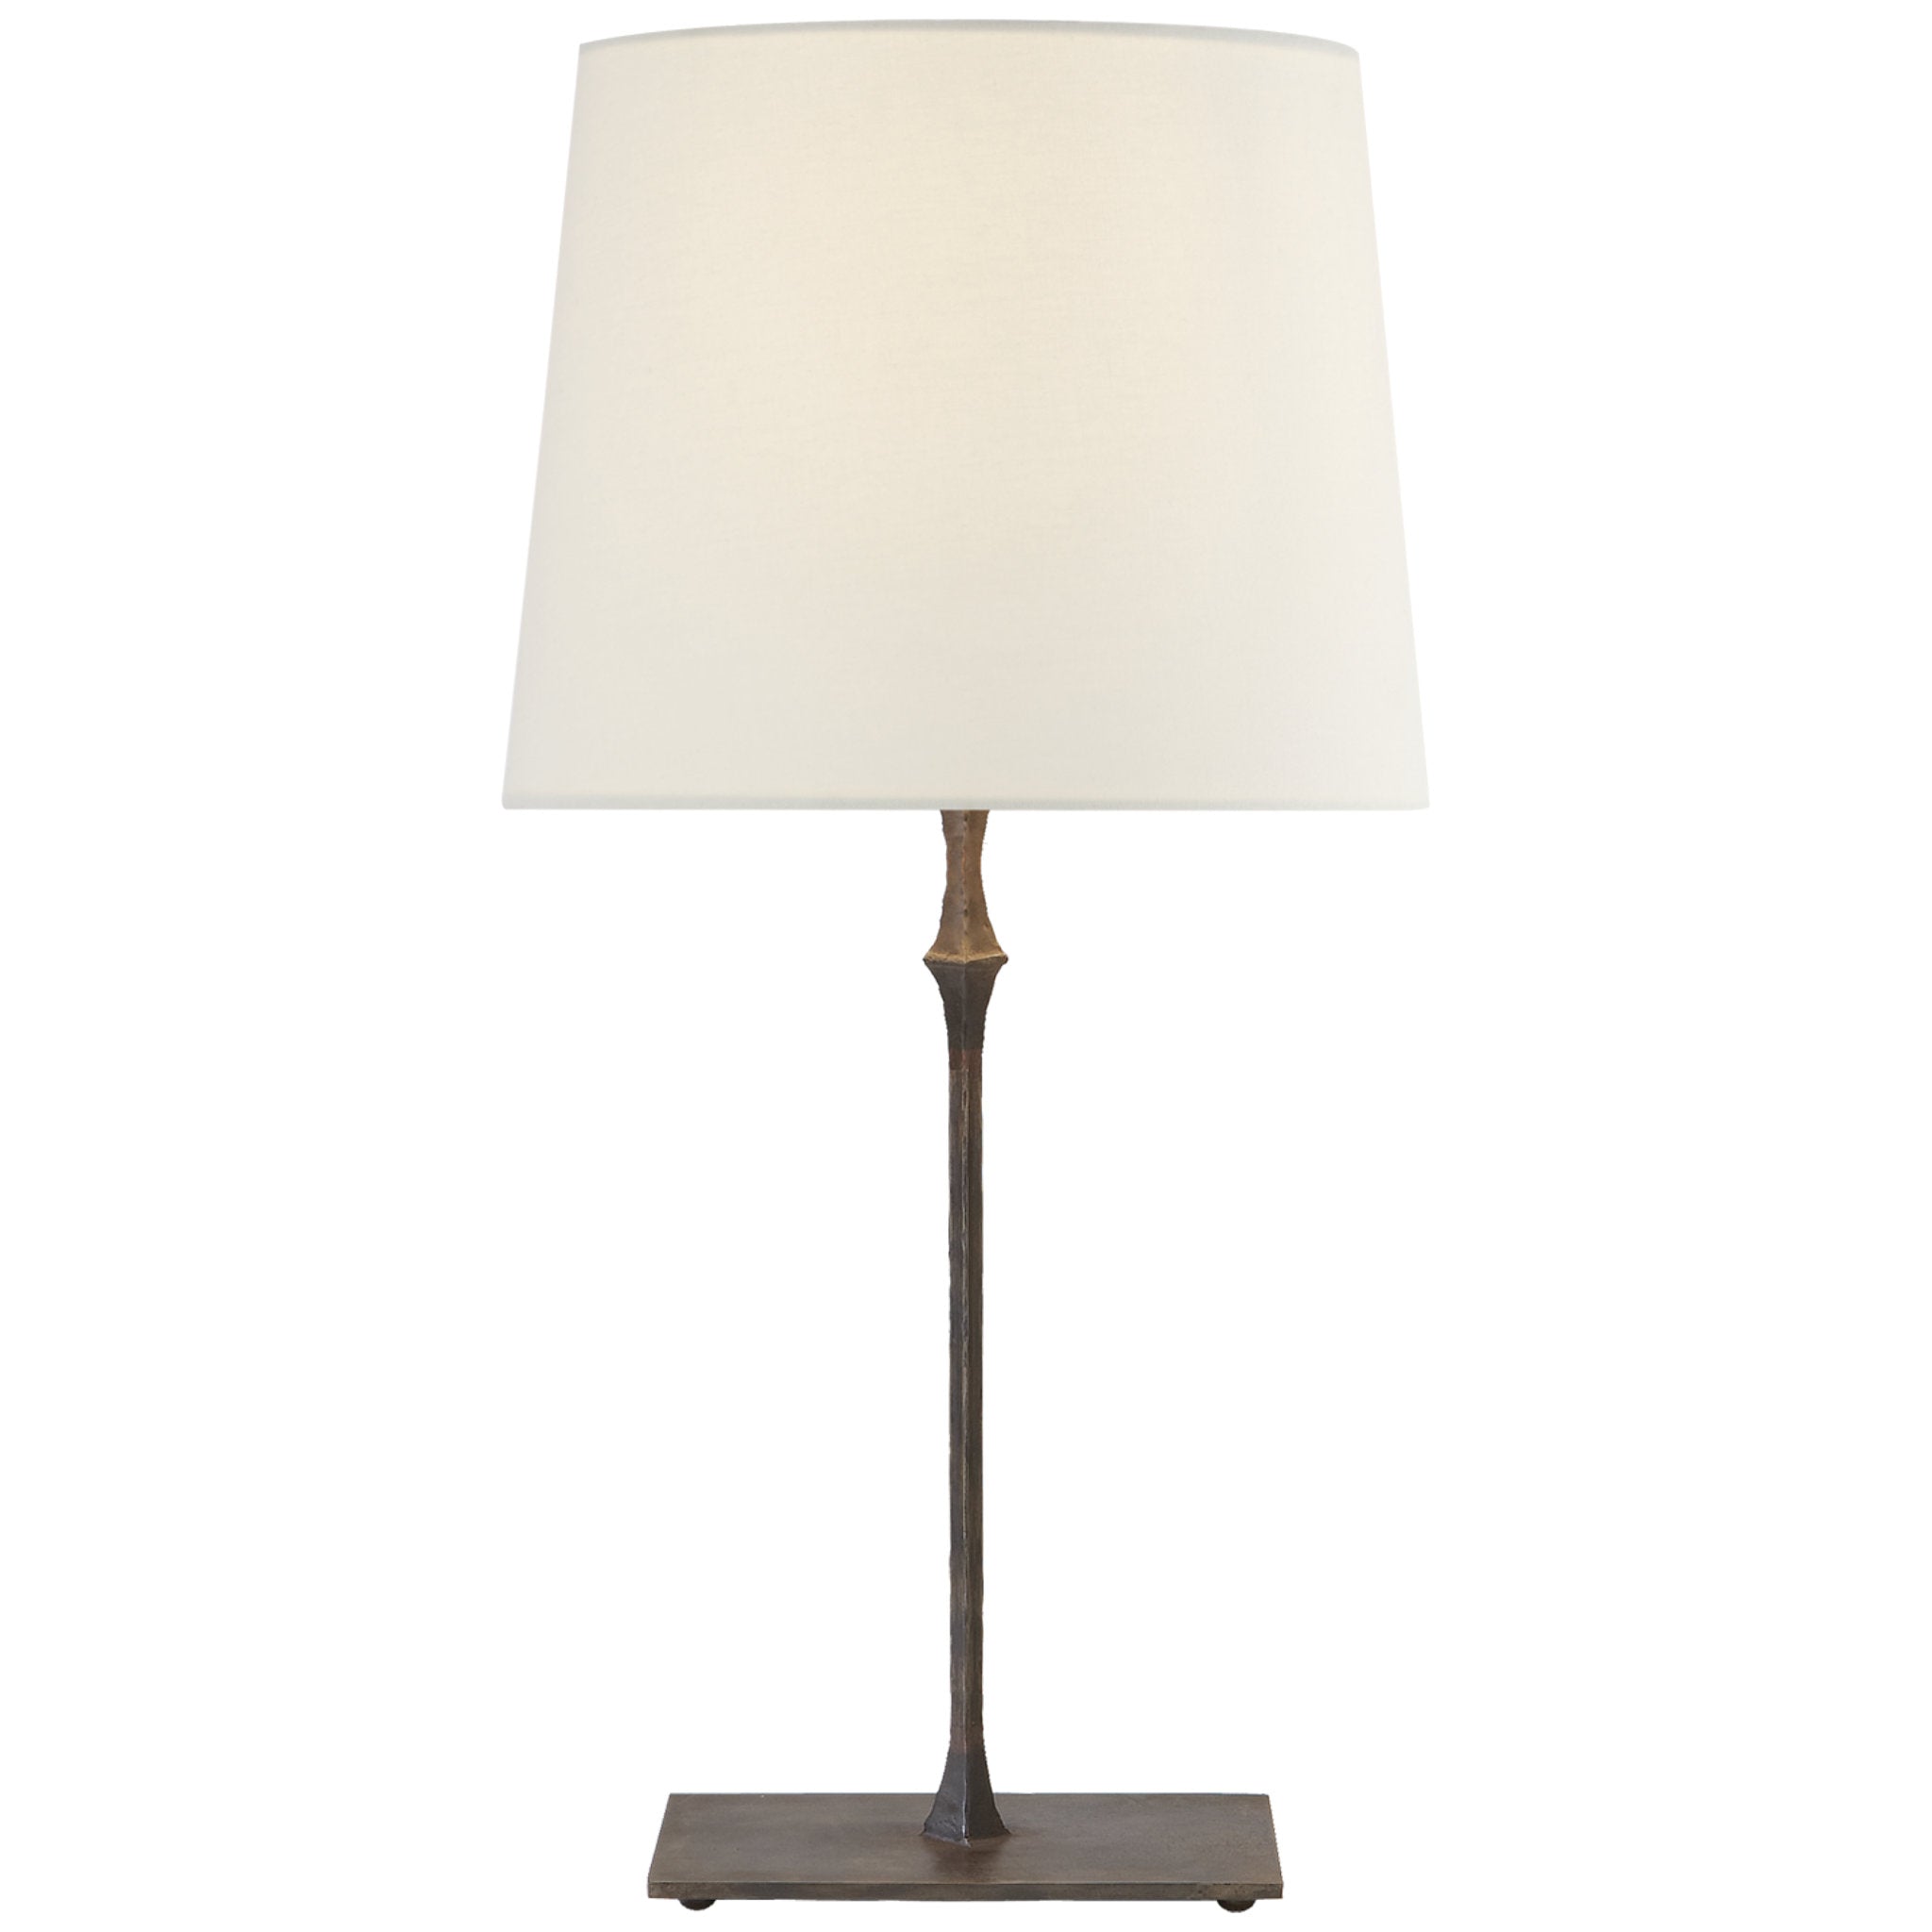 Visual Comfort Dauphine Bedside Lamp in Aged Iron with Linen Shade